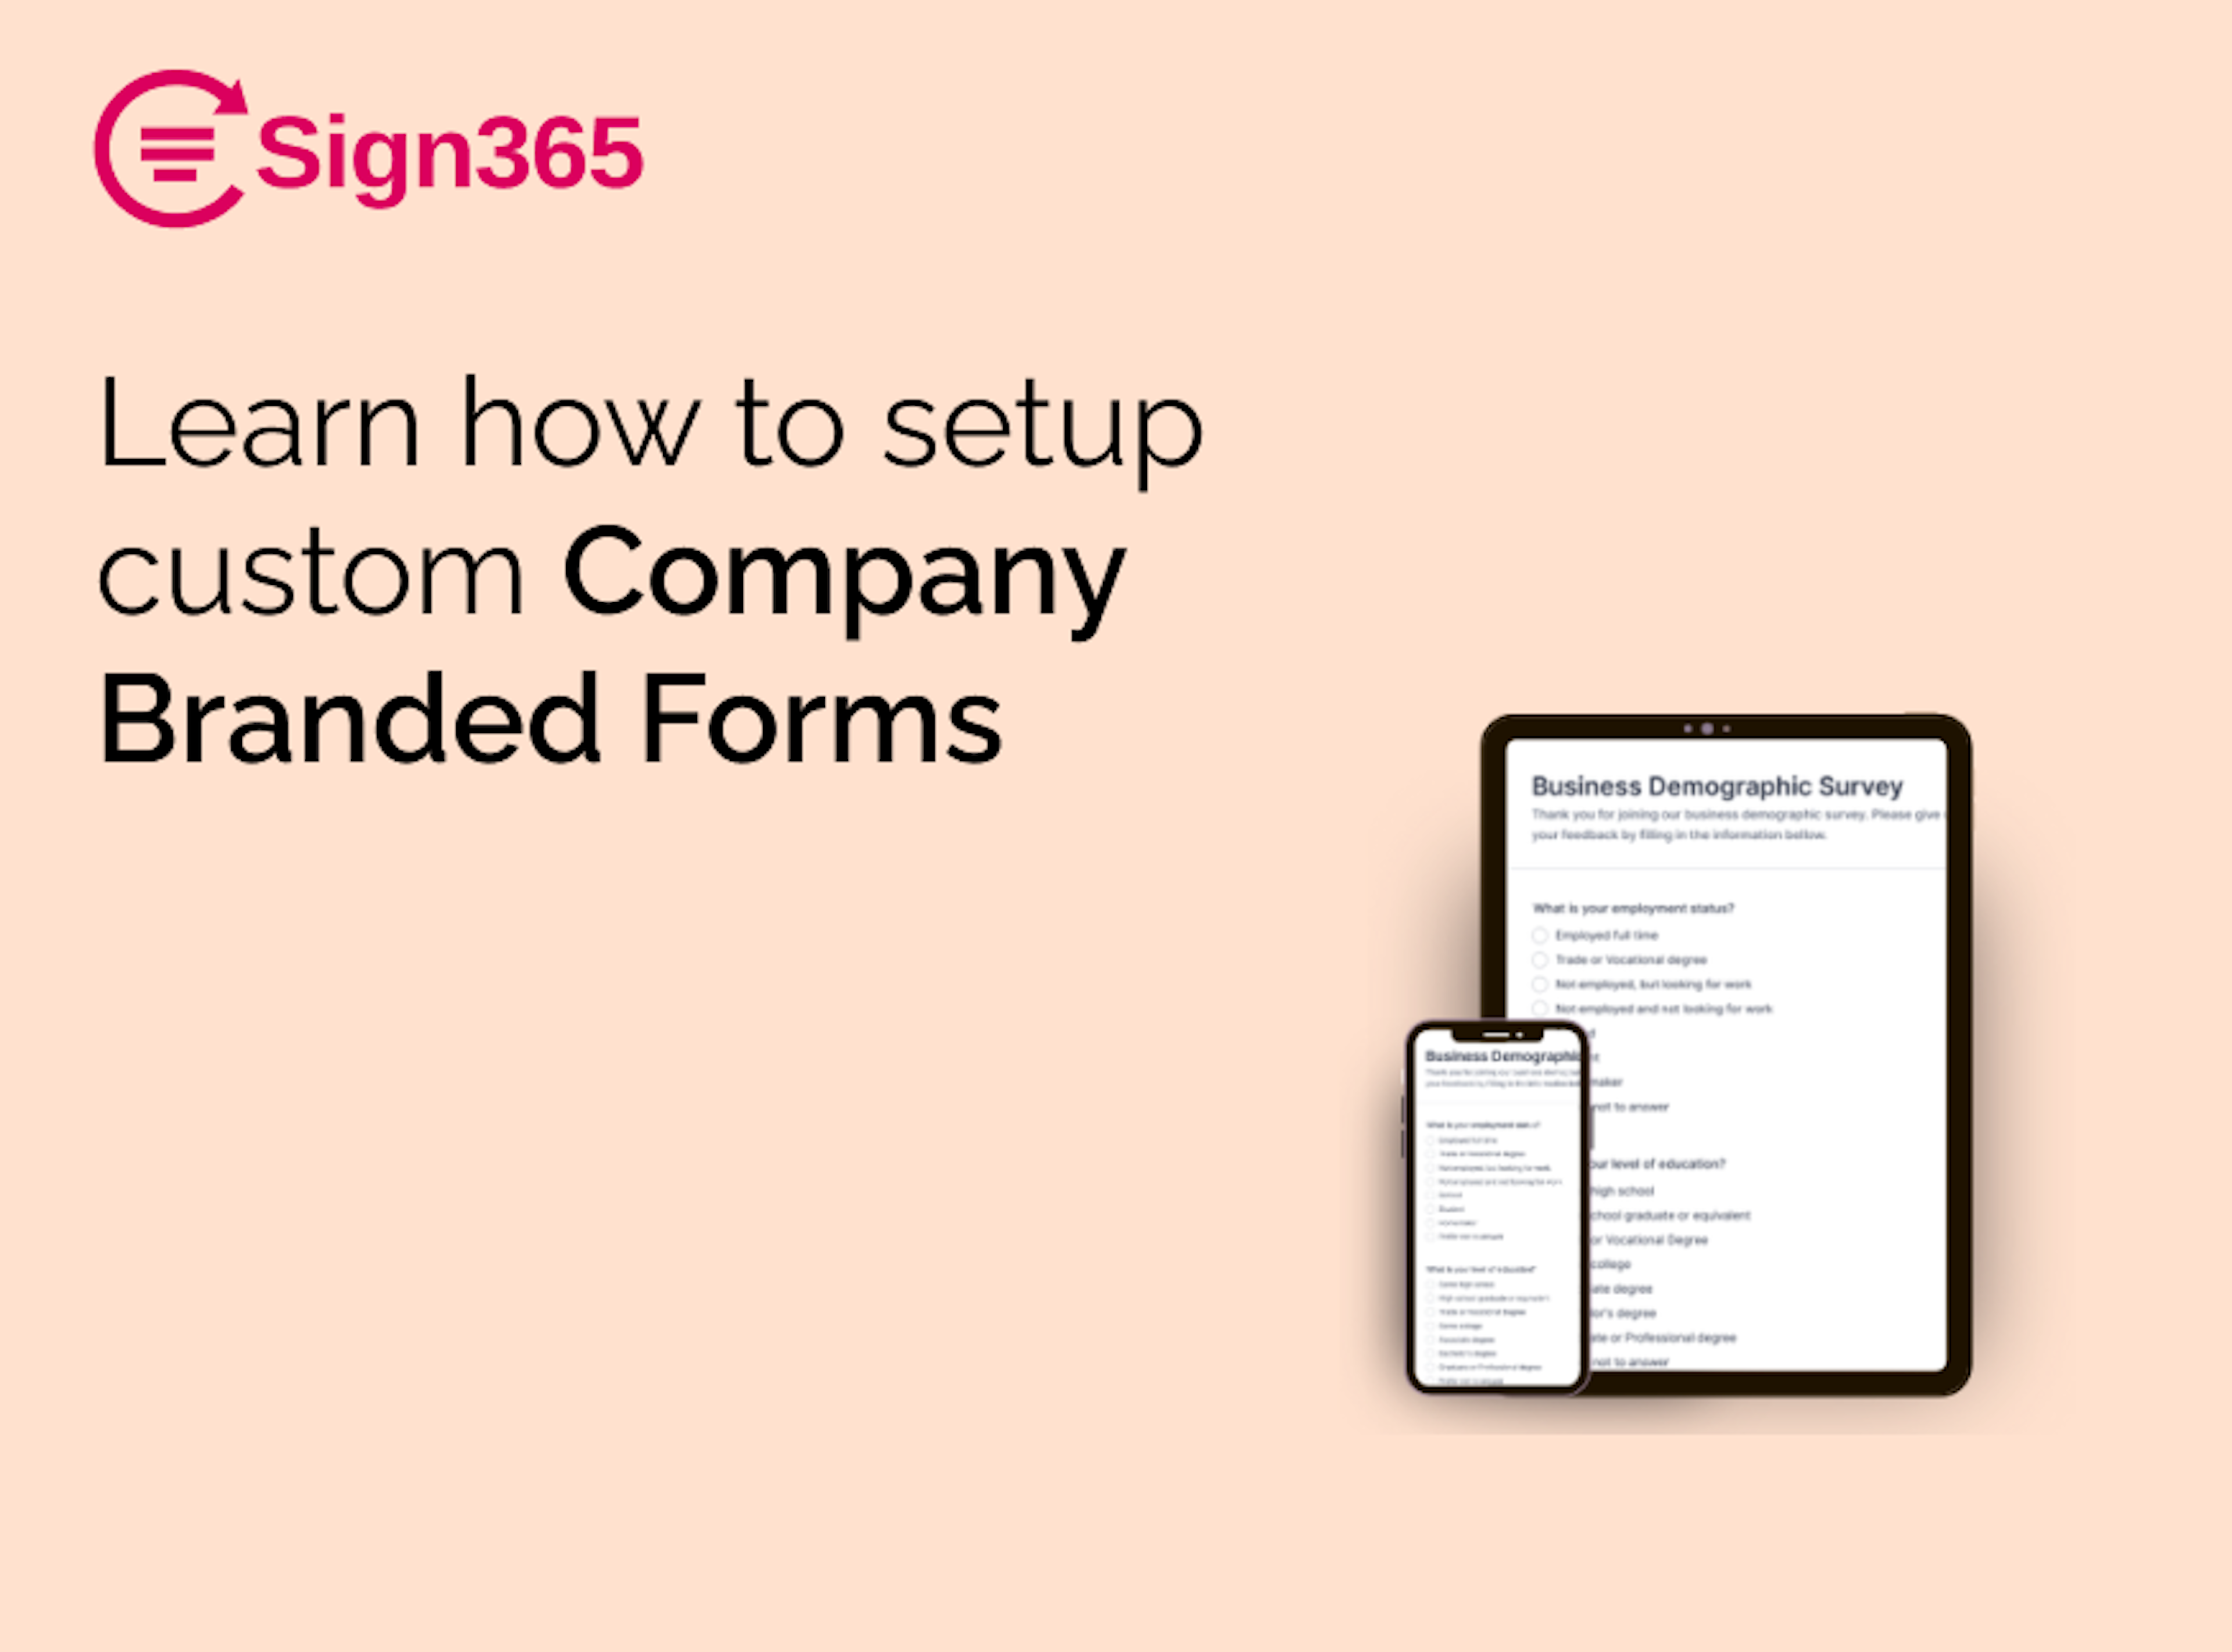 Creating Custom Forms: A Step-by-Step Guide